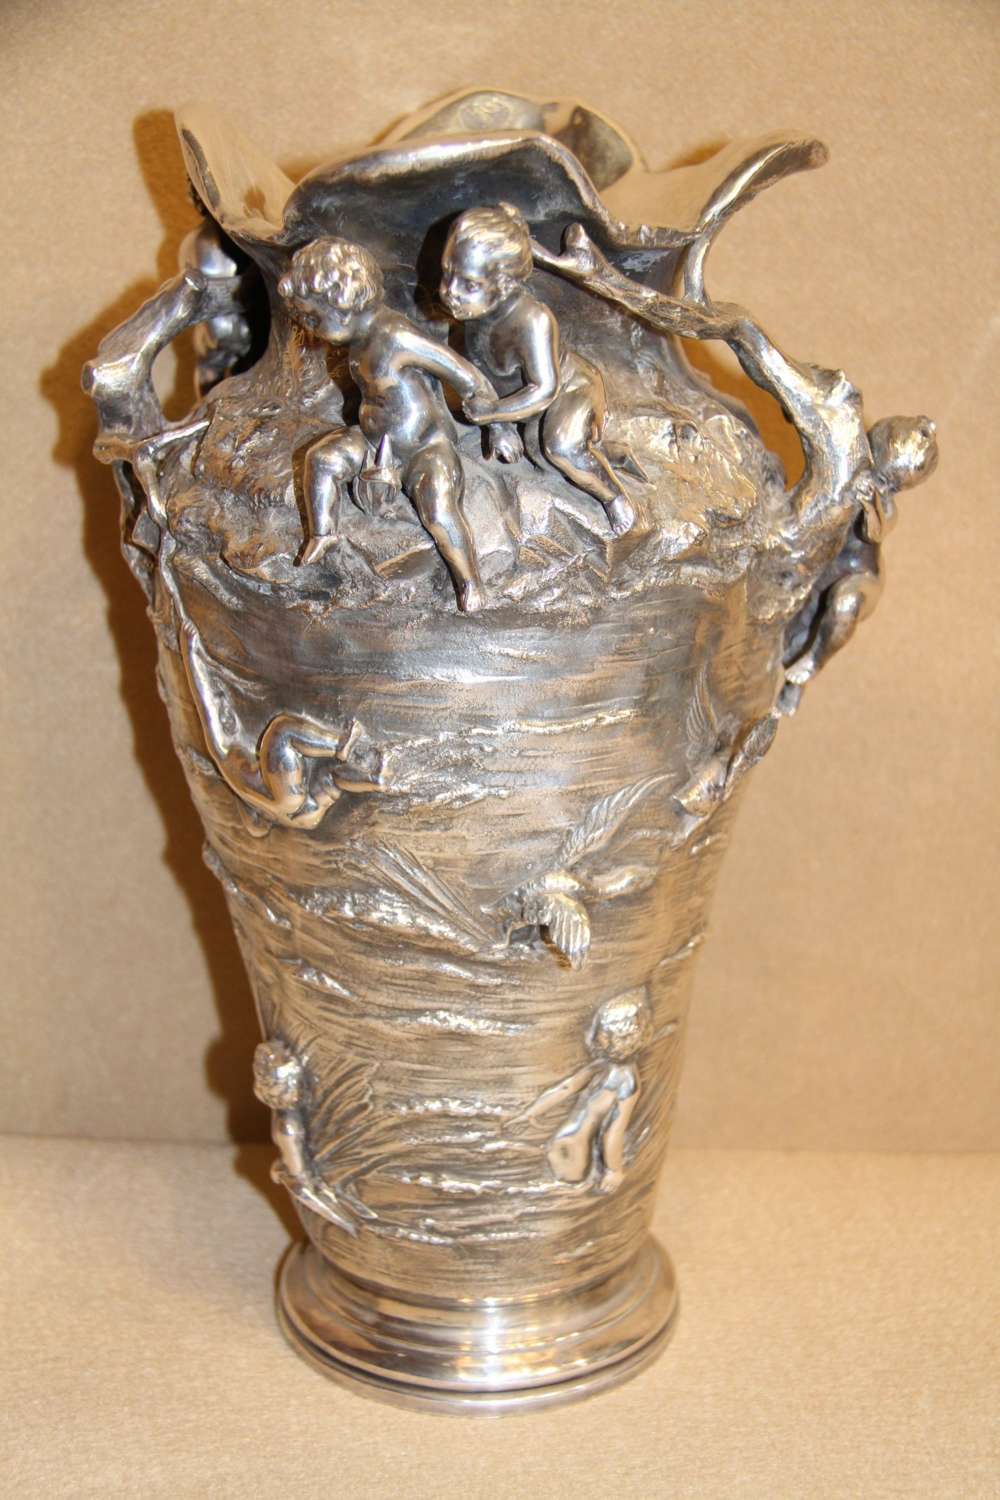 A Large And Decorative Silver Plated Vase Embellished With Water Nymphs  Casting Their Nets Into A Lake.